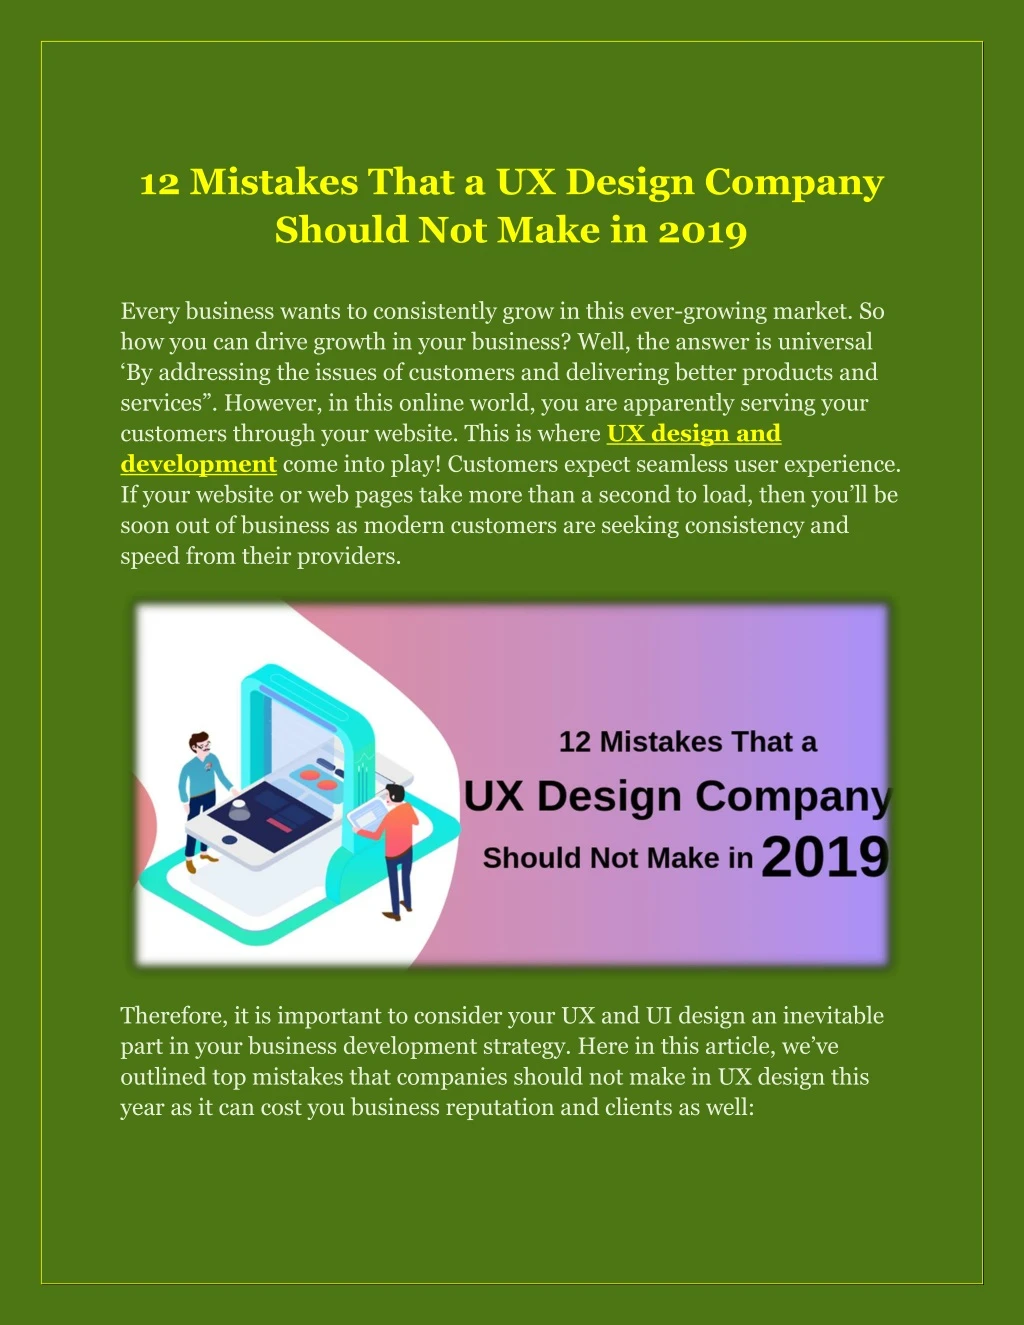 12 mistakes that a ux design company should